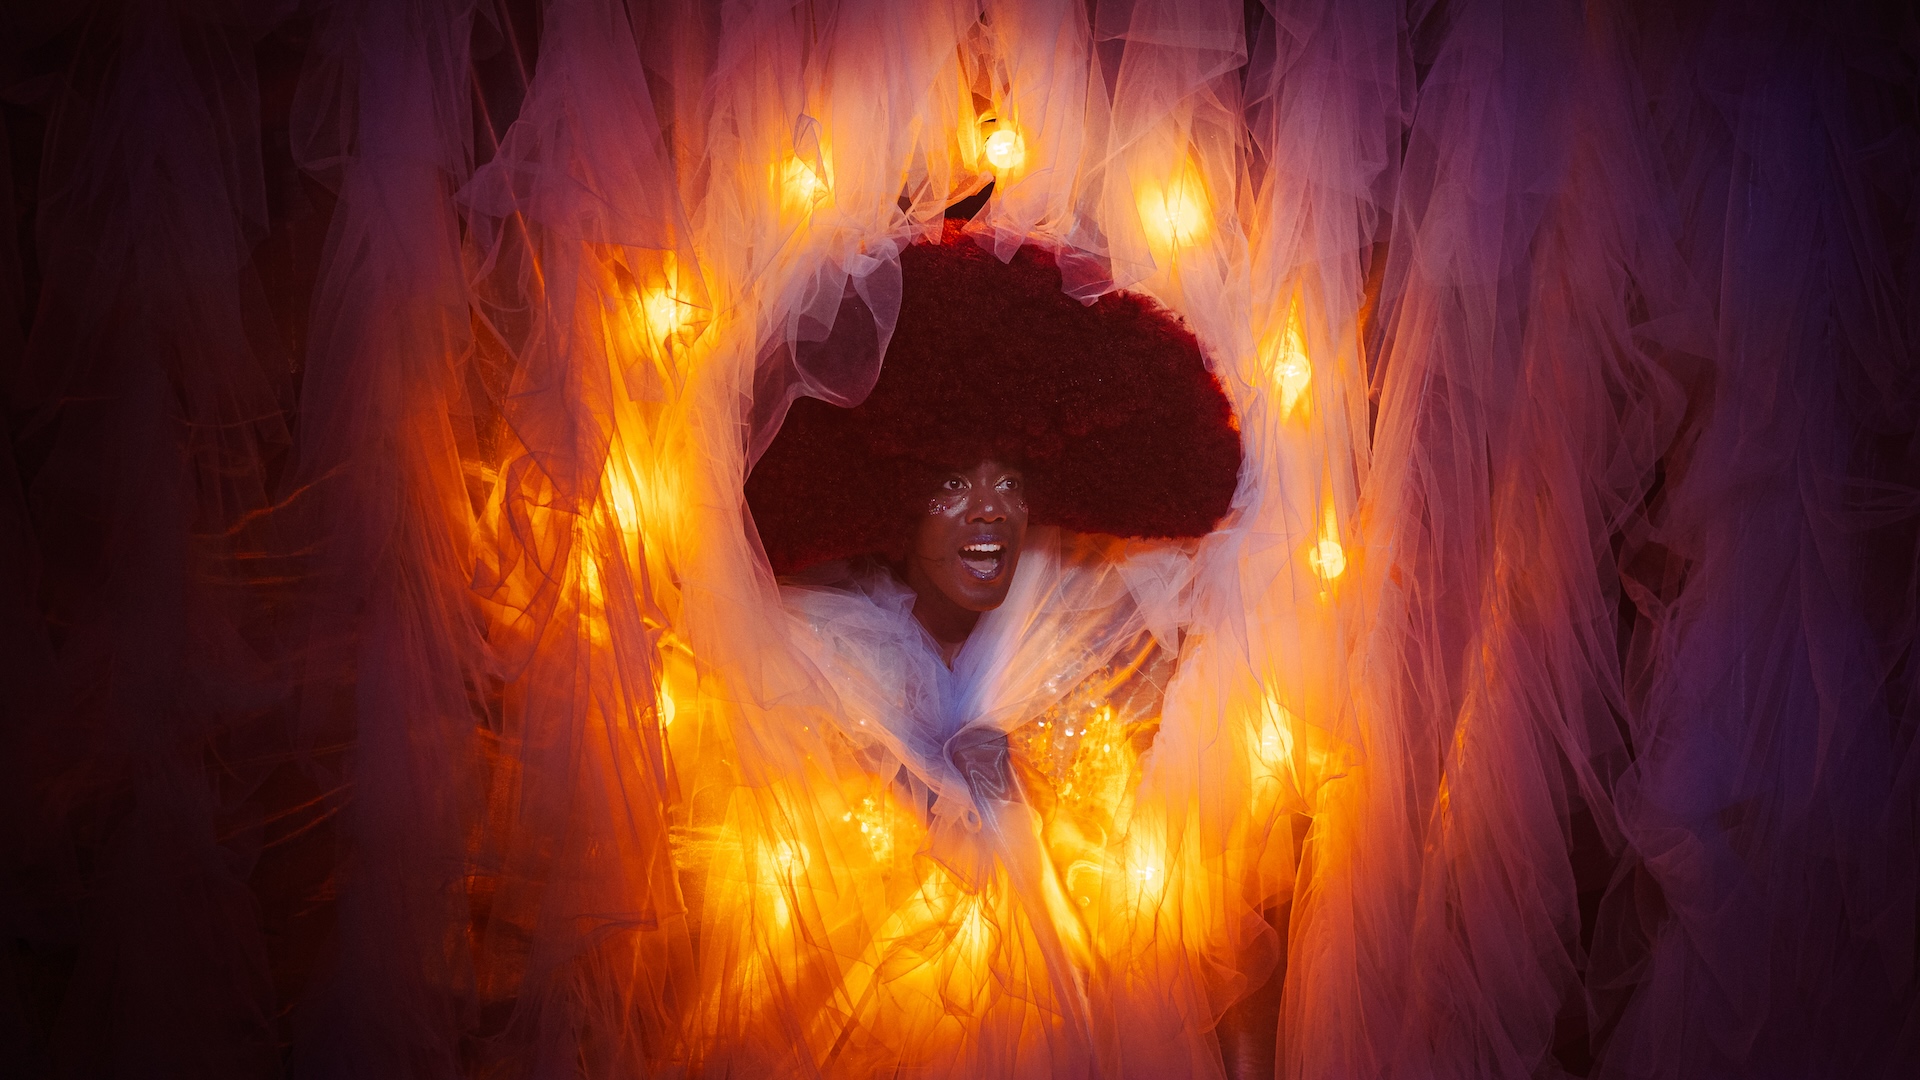 A black man with a large, dark afro and white makeup has a surprised look on his face while peeking out of hole in an orange and purple background